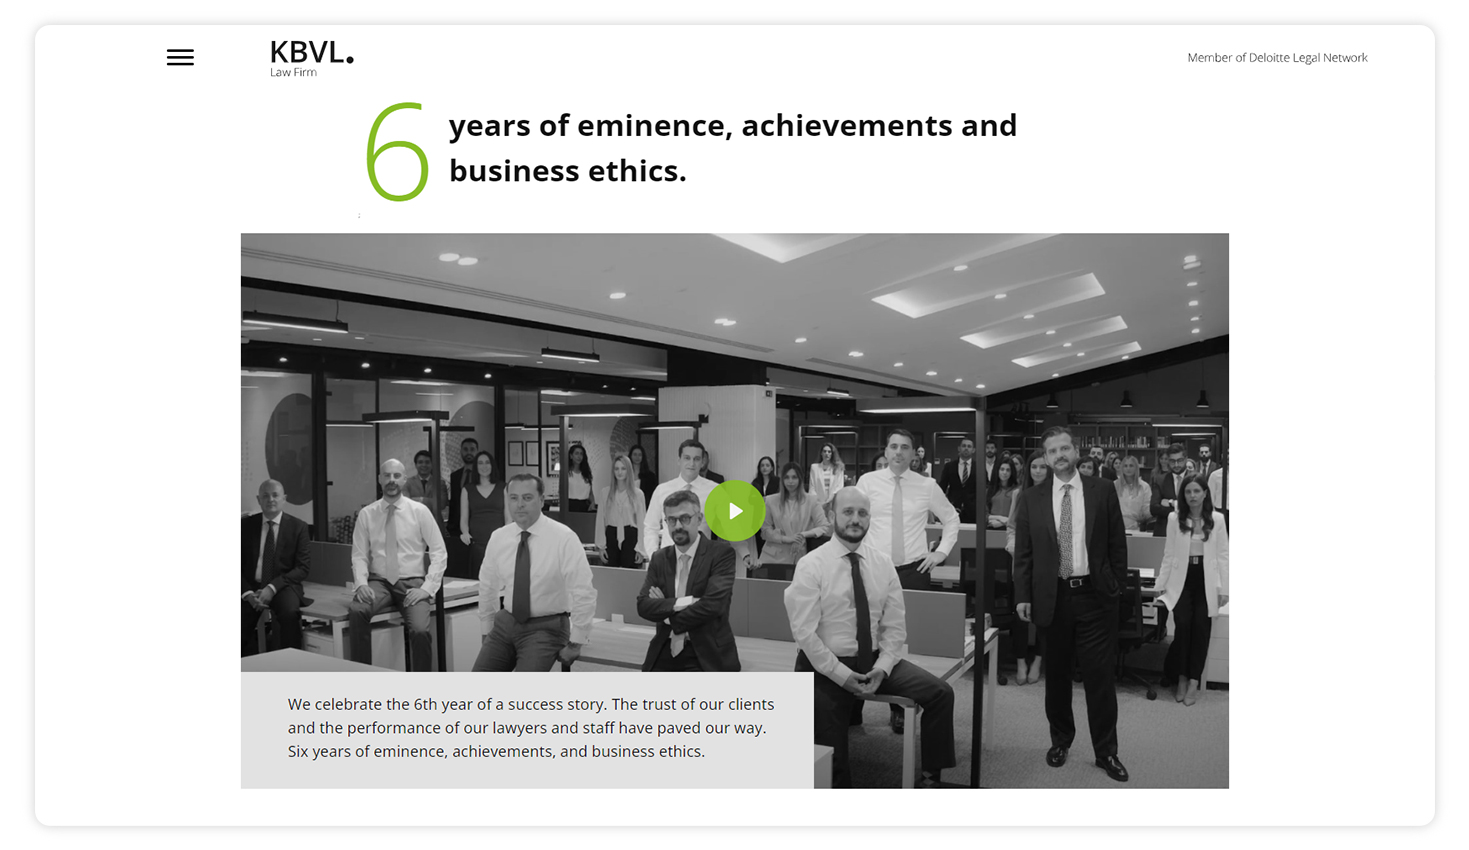 Six years of eminence, achievements, and business ethics WEB DESIGN